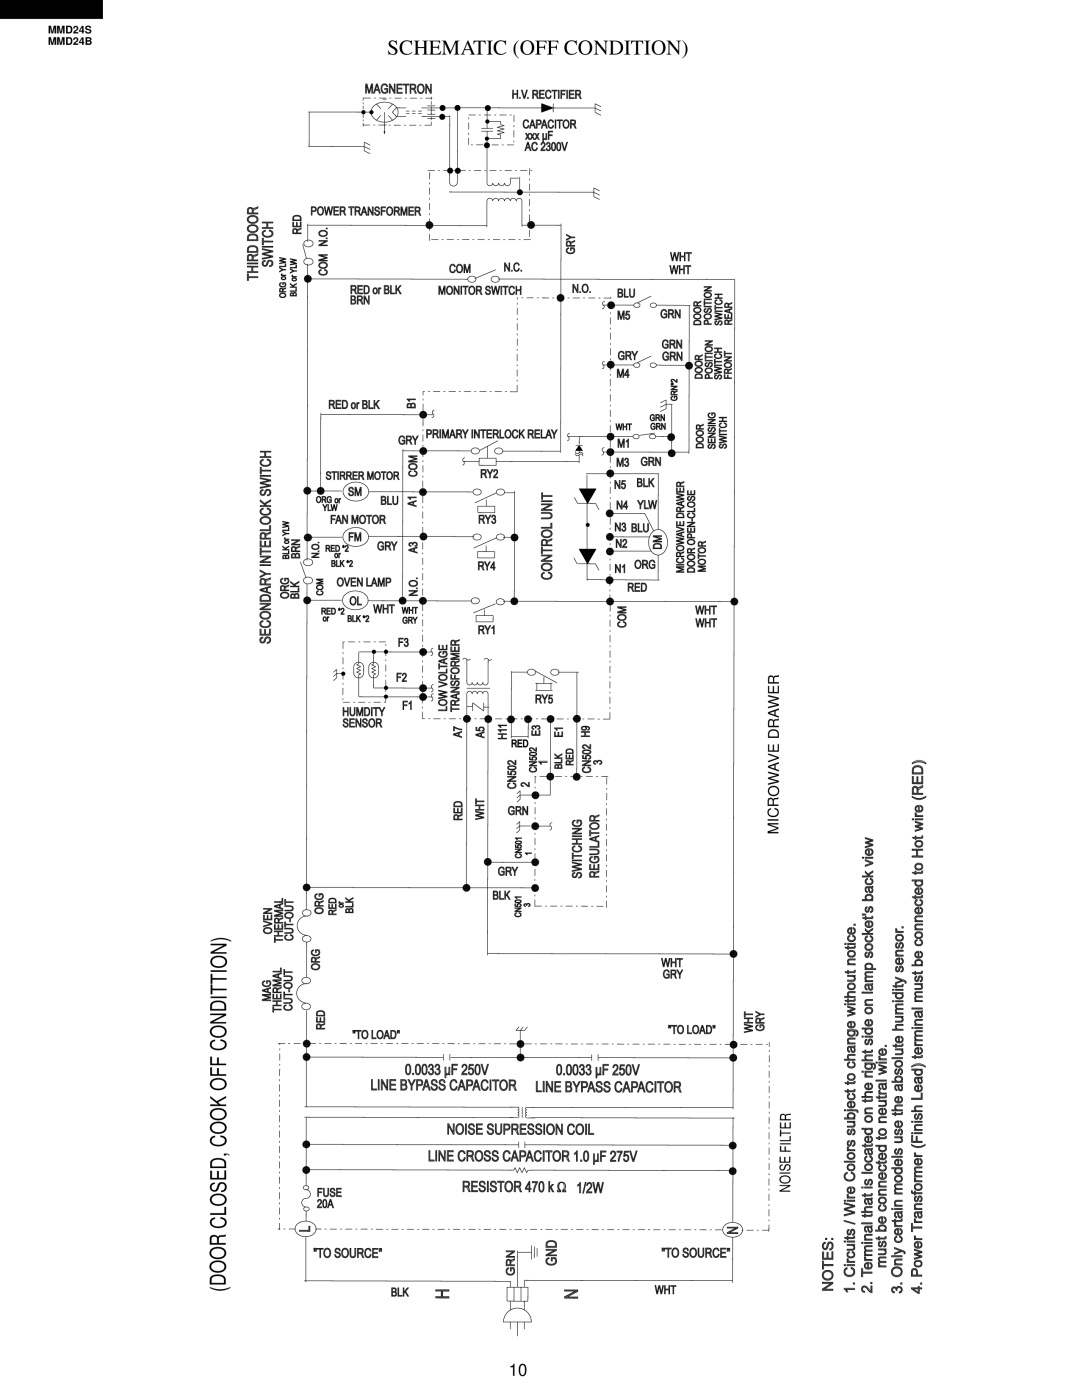 Sharp MMD24B, MMD24S manual Schematic Off Condition, Closed, Cook Off Condittion, Door 